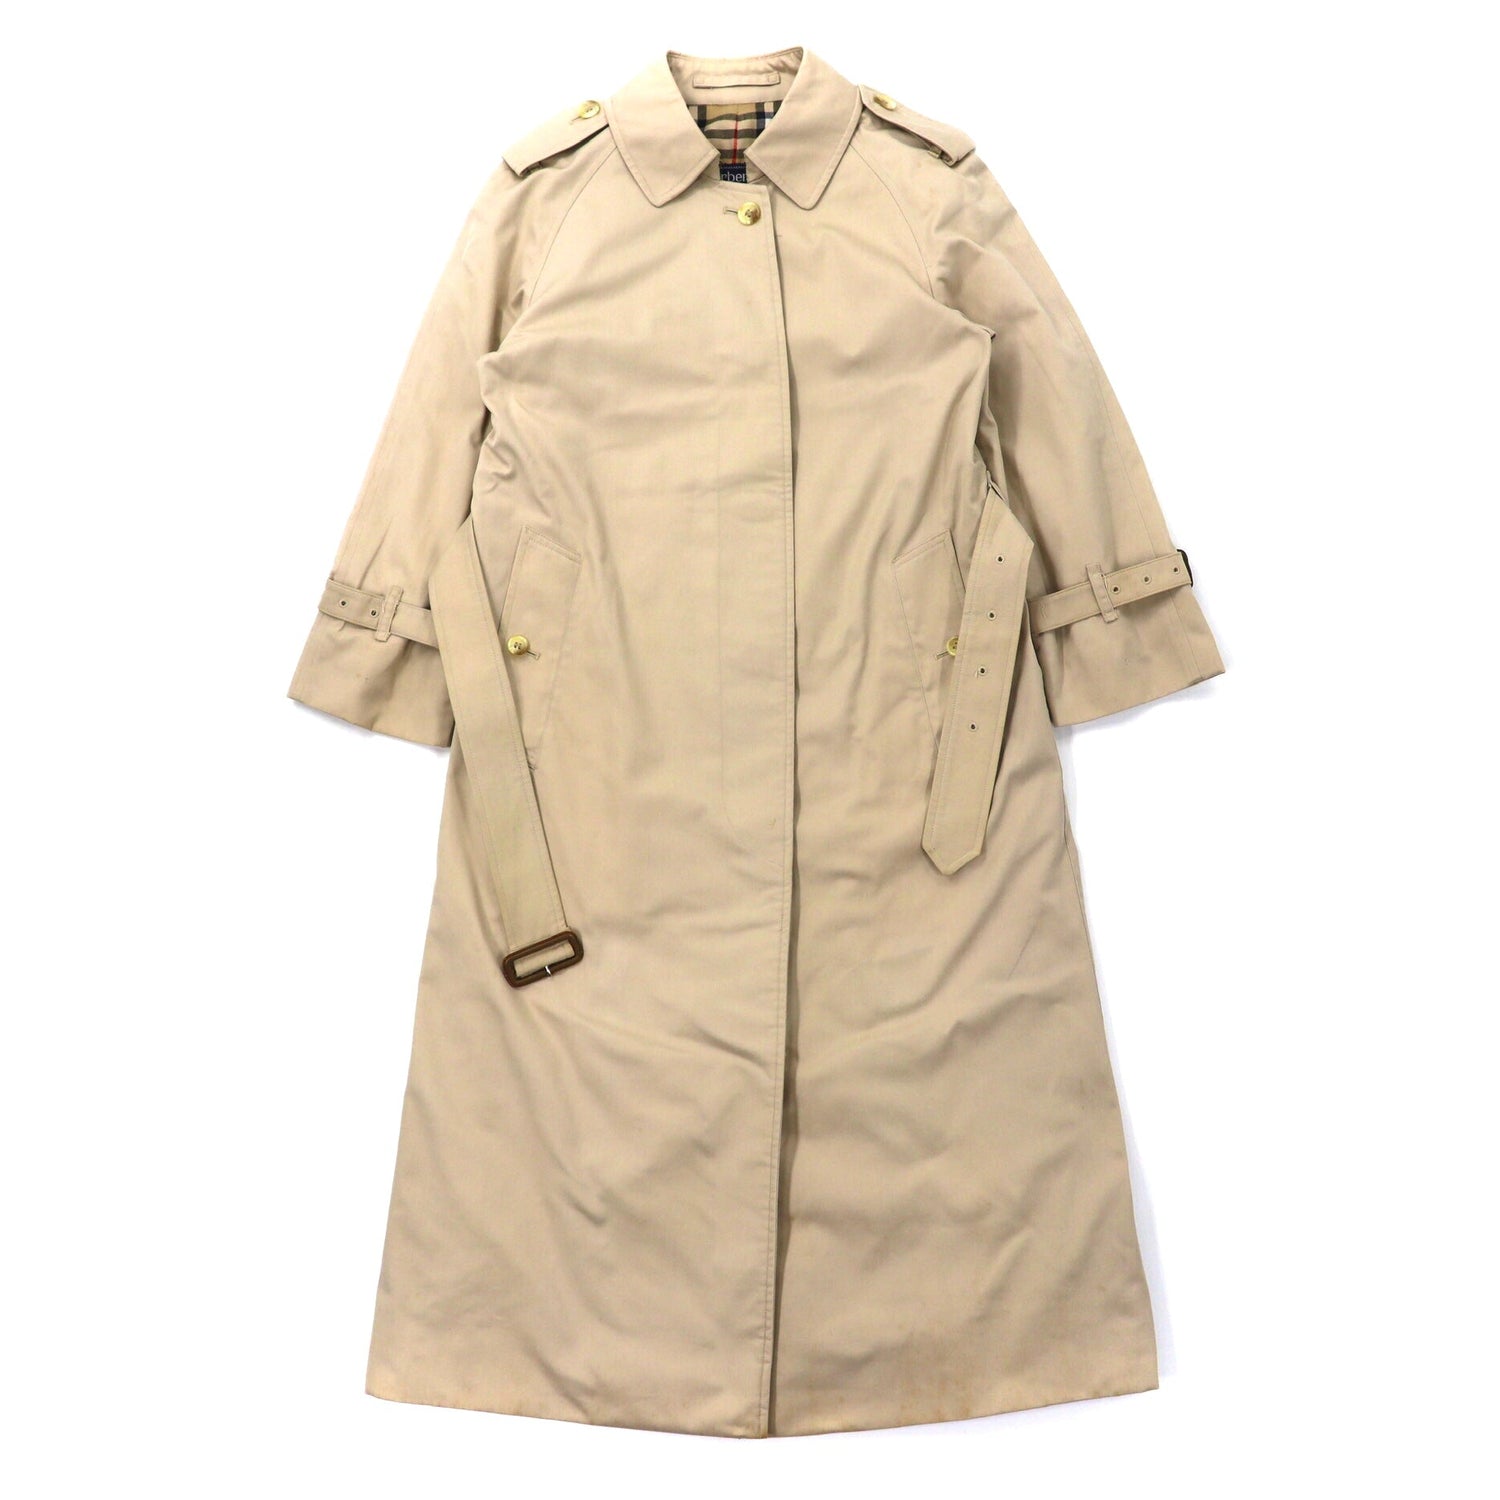 BURBERRYS COAT M Beige Cotton Lining CHECKED England Made – 日本然